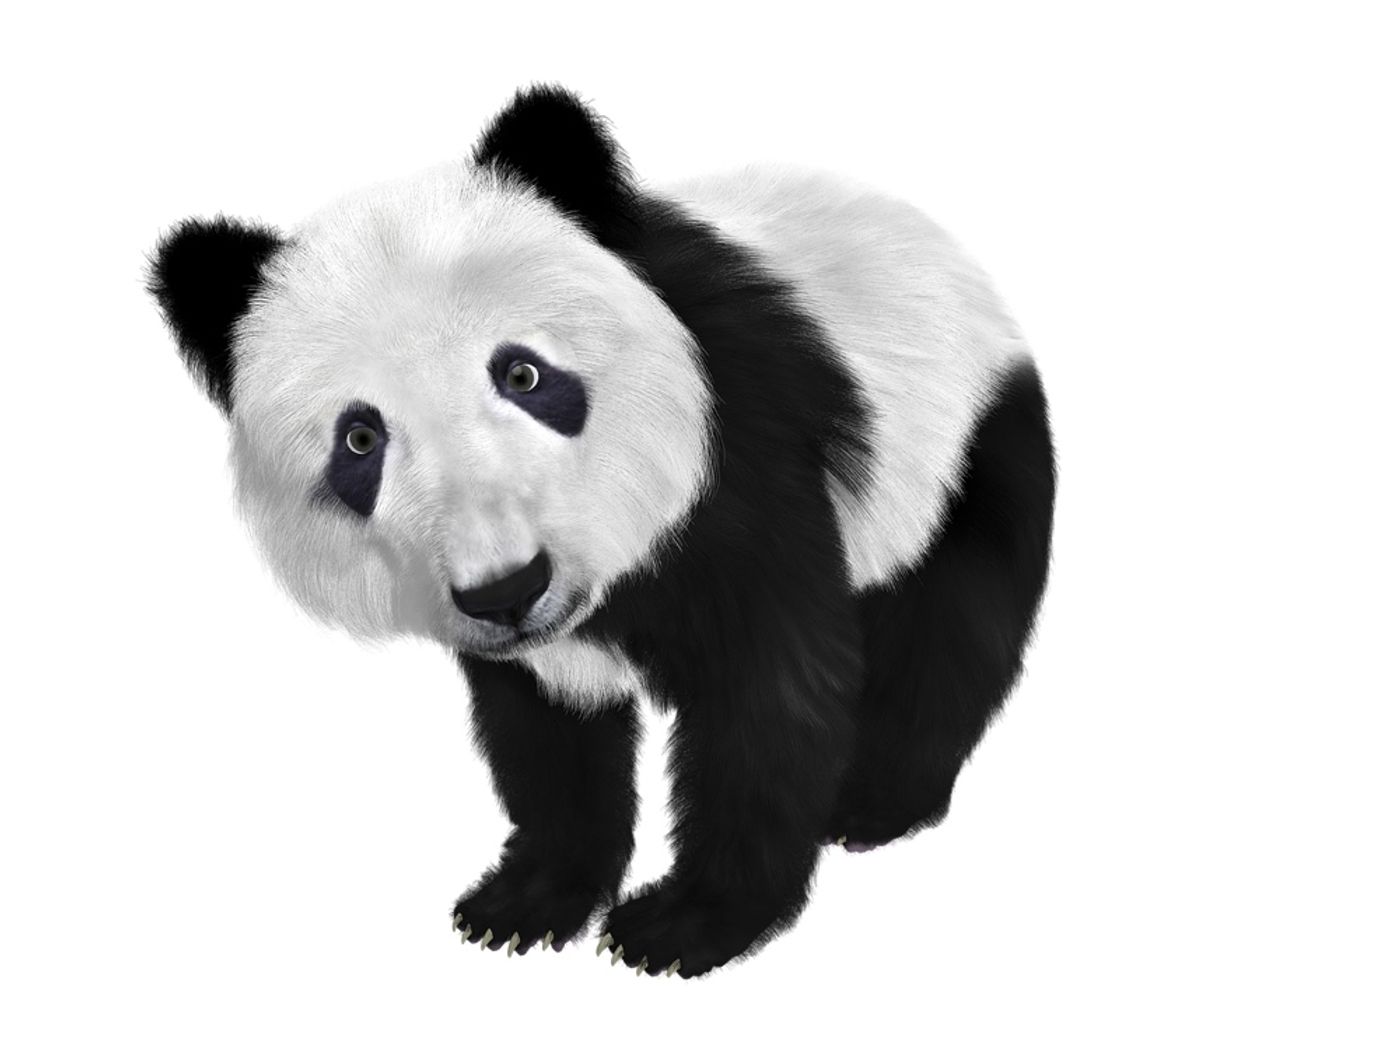 Giant pandas have black and white fur color schemes that aren't like many other mammals in their class.